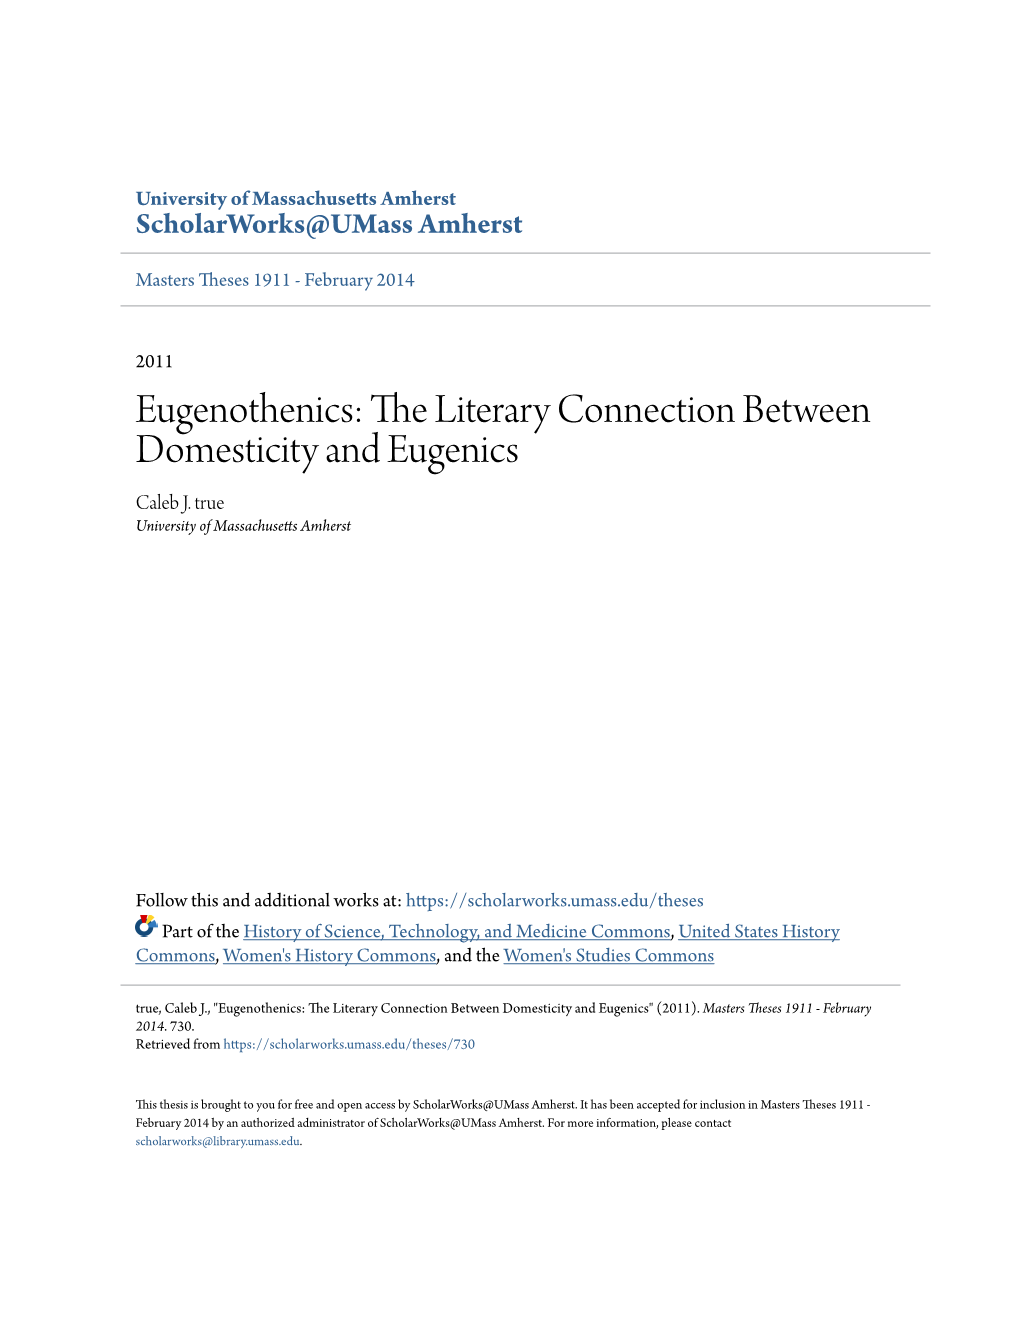 Euthenics, There Has Not Been As Comprehensive an Analysis of the Direct Connections Between Domestic Science and Eugenics